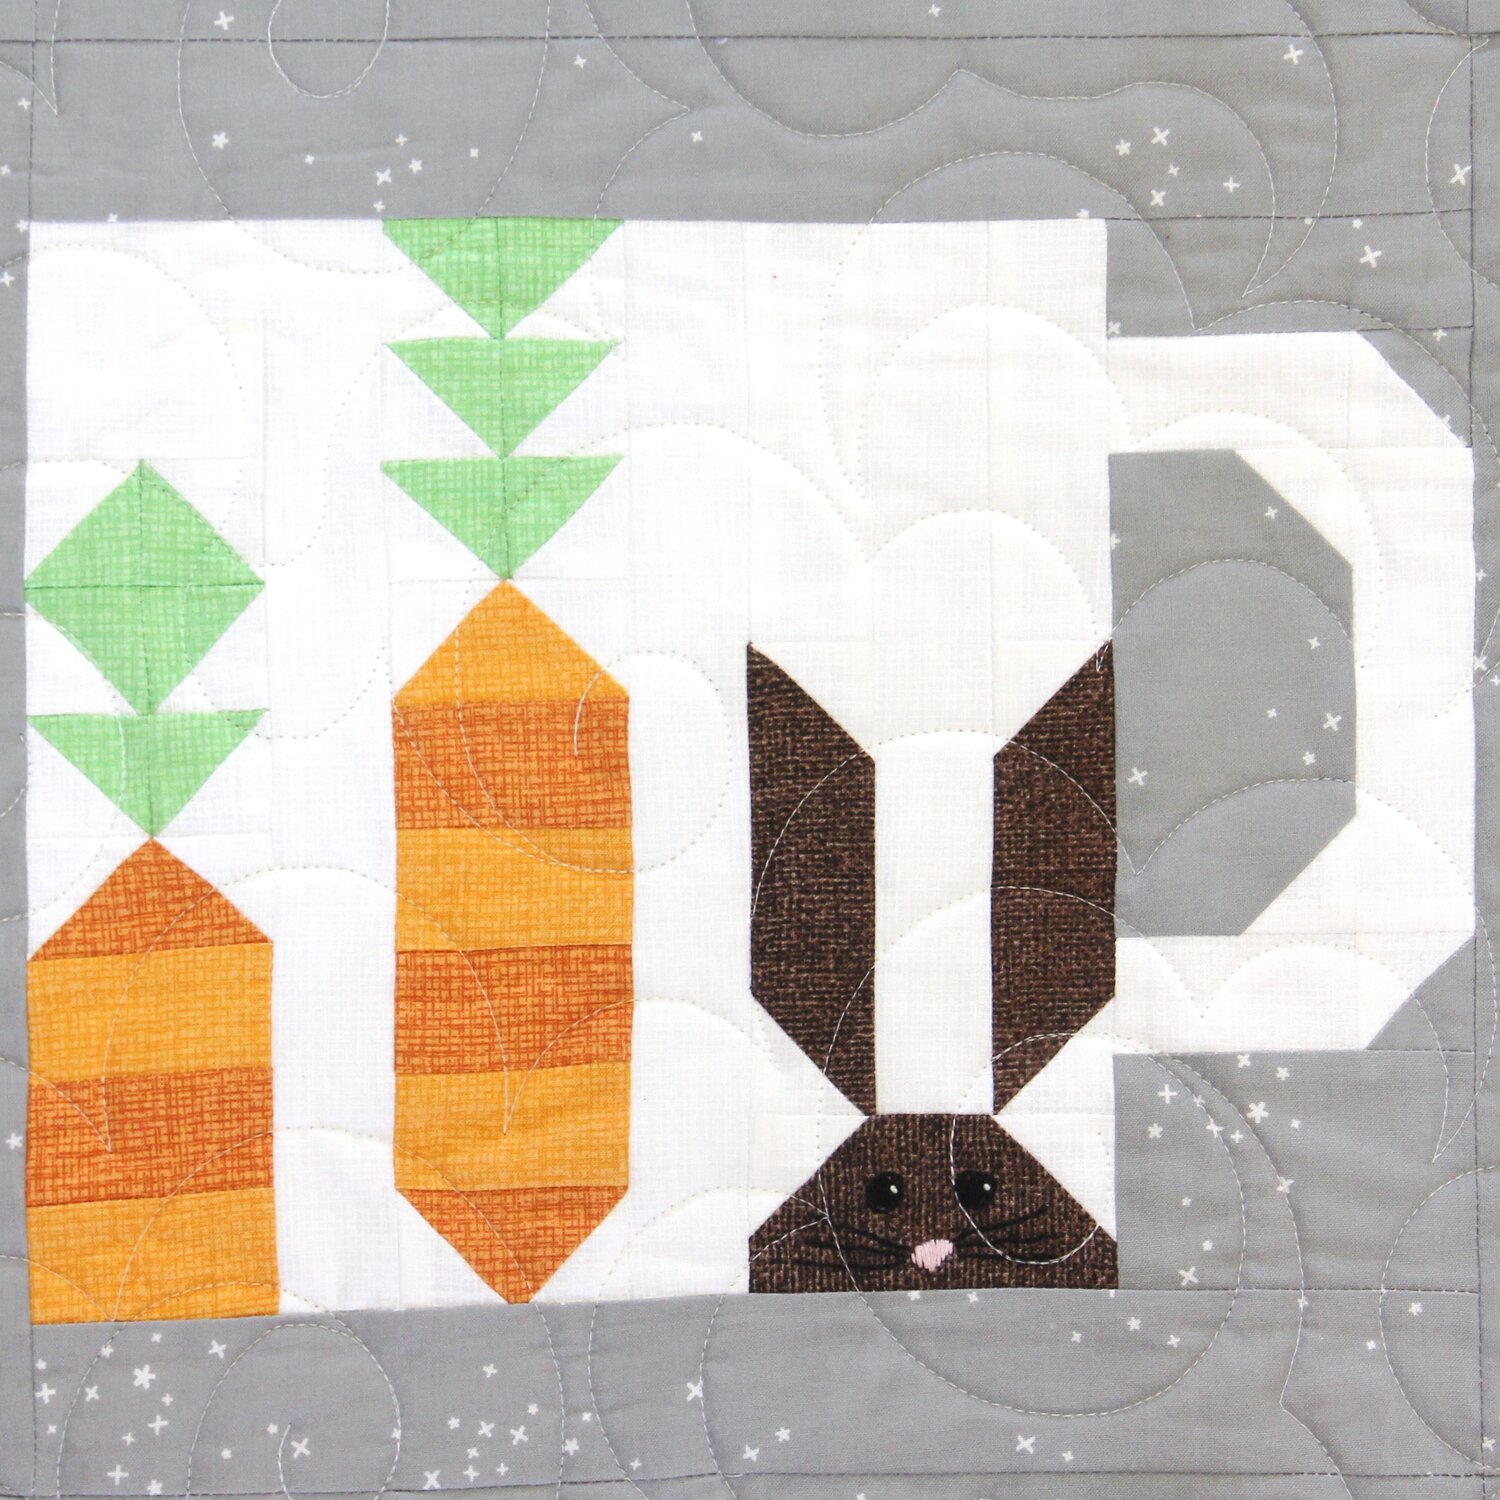 "Bunny" is a Free Easter Quilt Block Pattern designed by Staci from Crafty Staci!